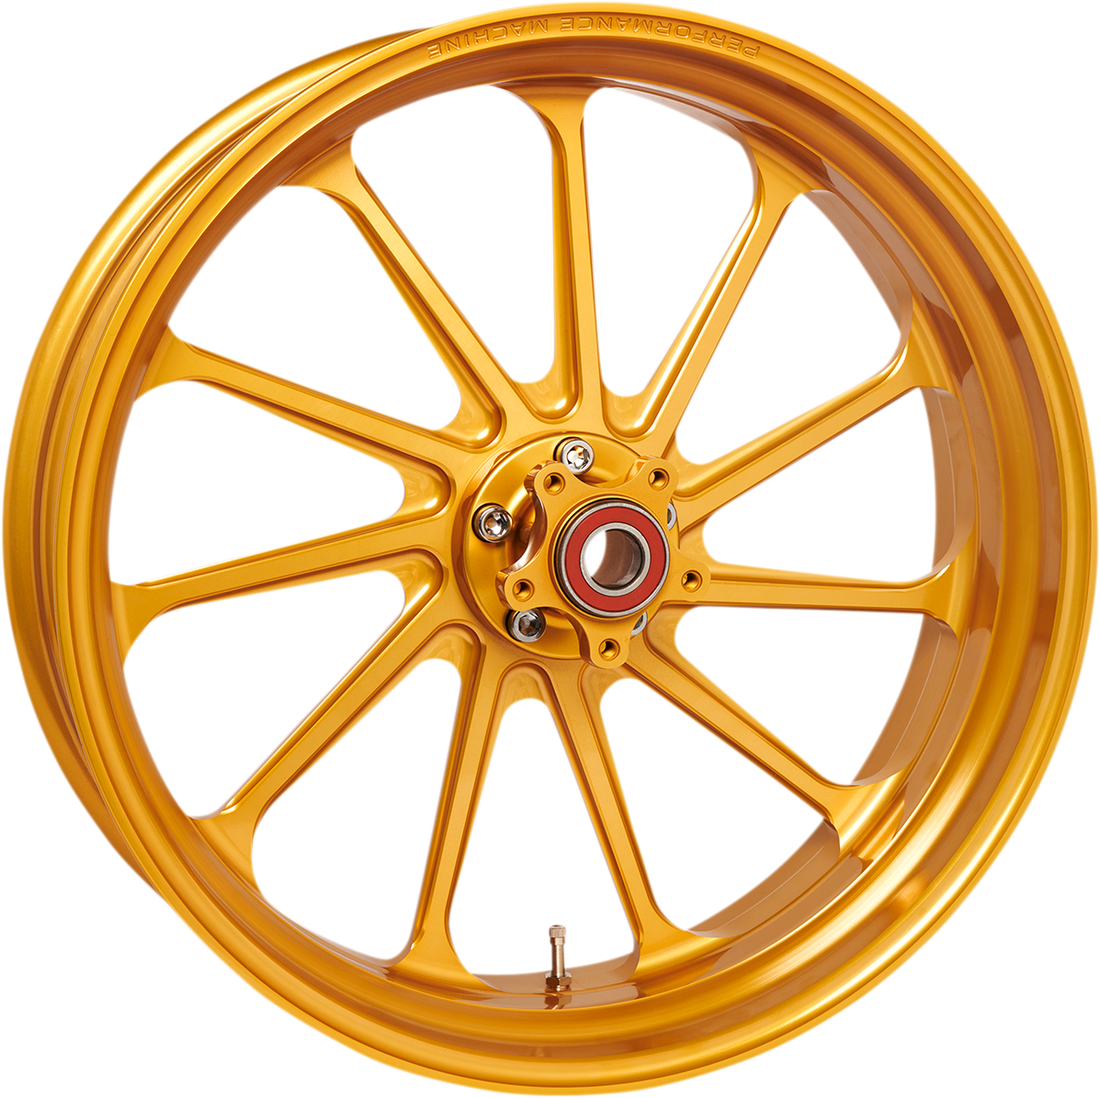 0201-2359 - PERFORMANCE MACHINE (PM) Wheel - Assault - Dual Disc - Front - Gold Ops* - 21"x3.50" - With ABS 12047106SLAJAPG